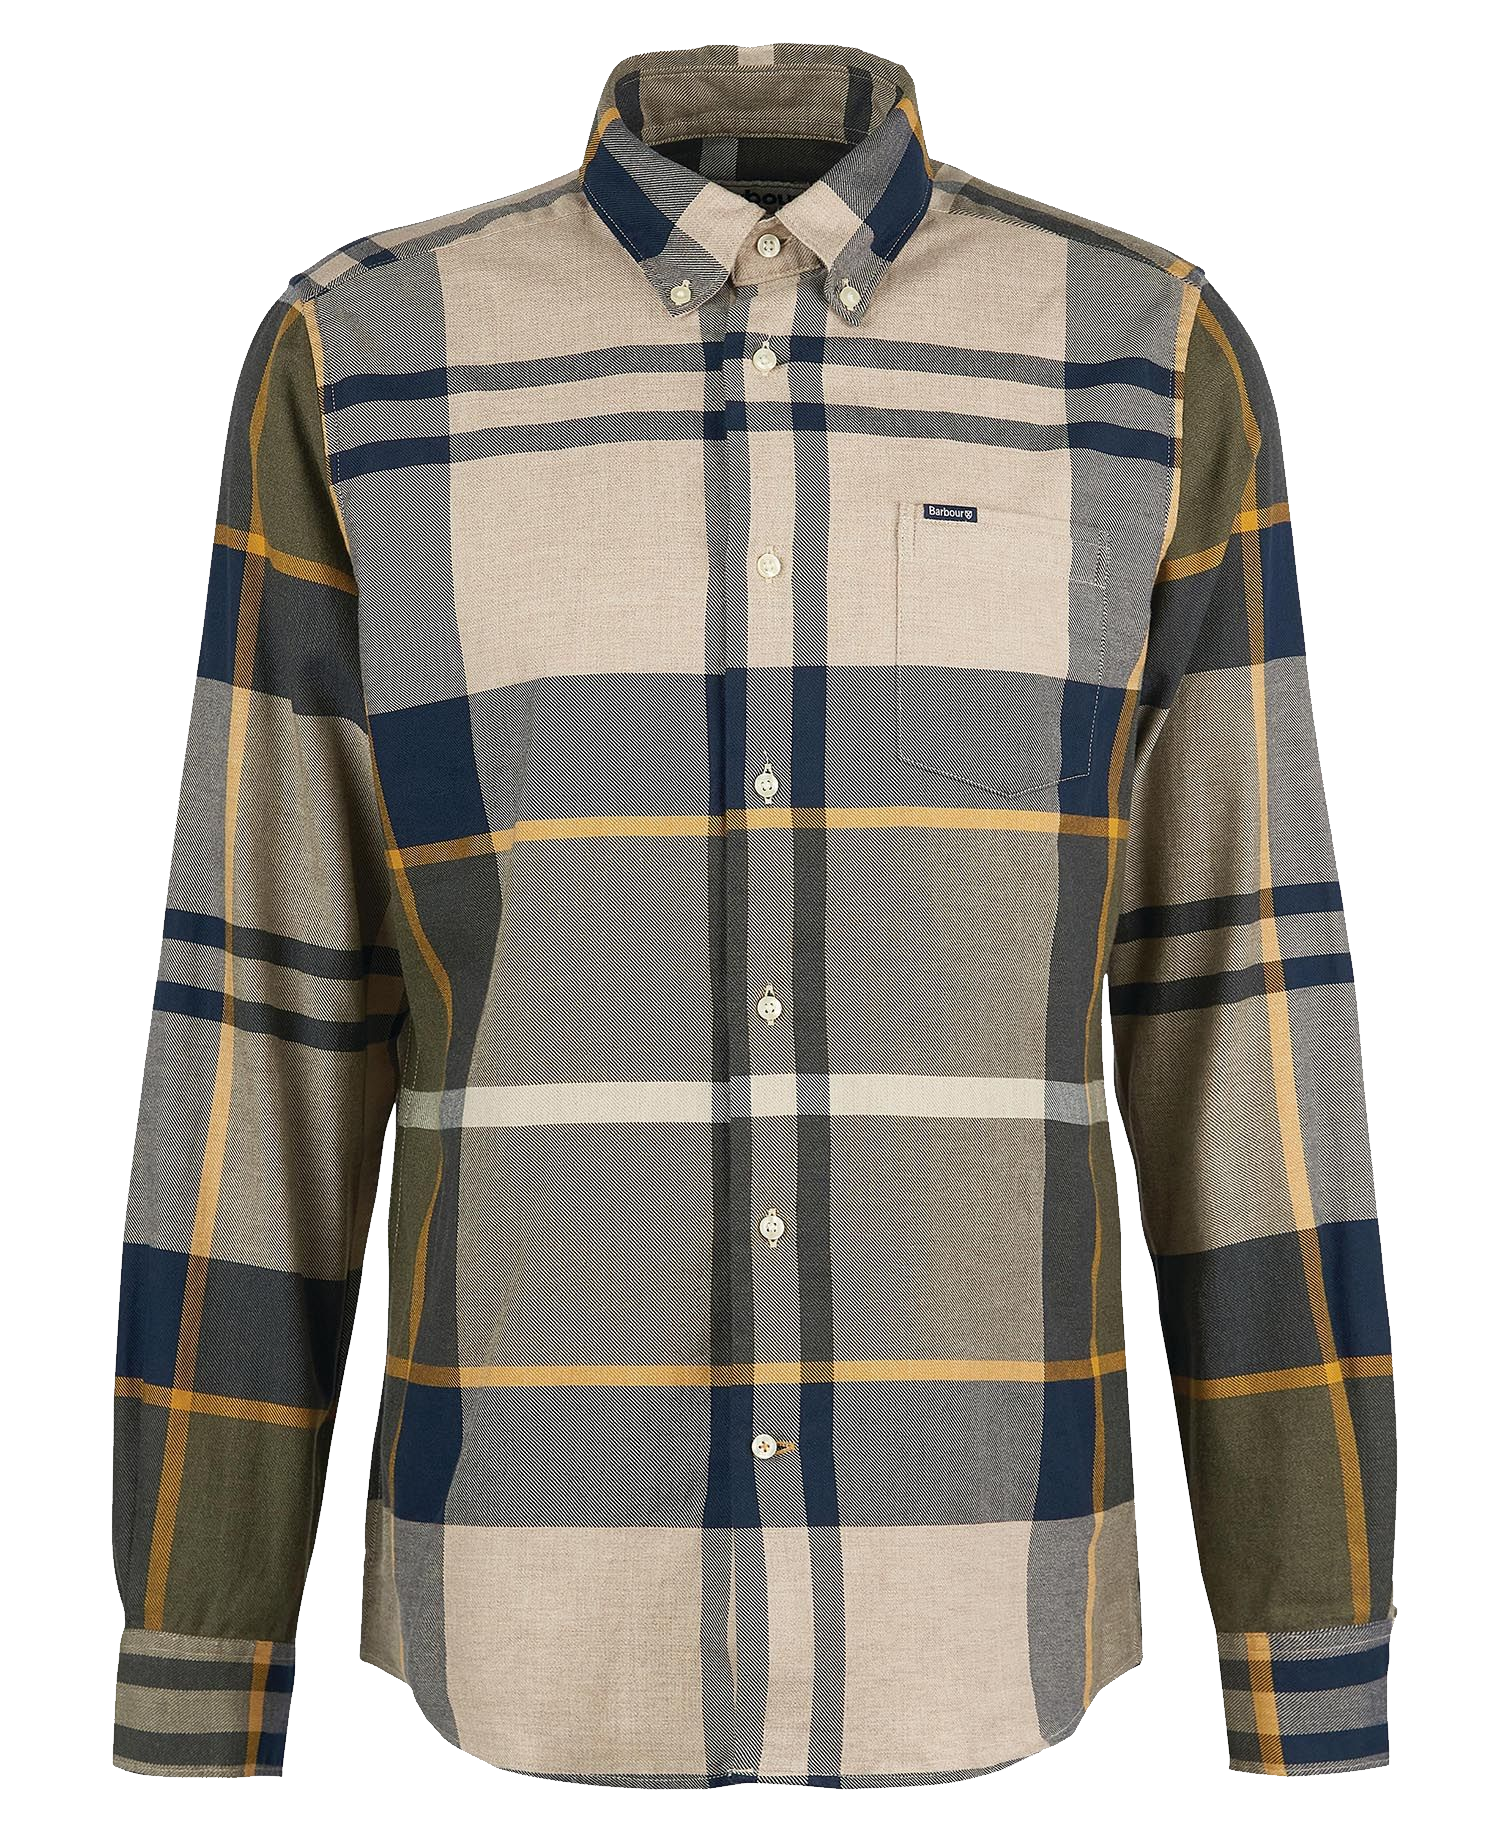 Barbour Dunoon Tailored Shirt Forest Mist